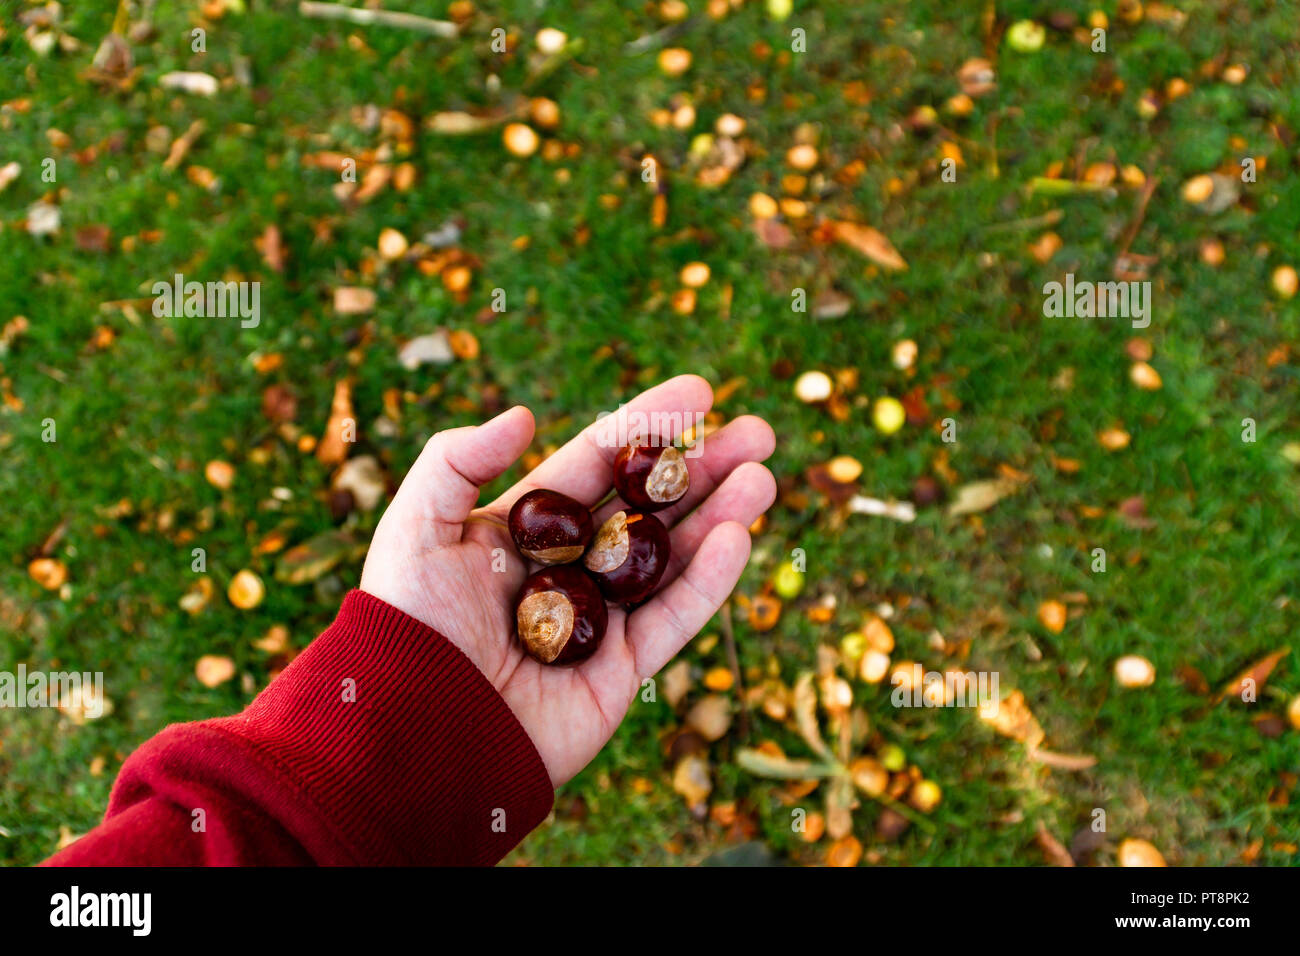 Male hand holding four horse chestnuts Stock Photo